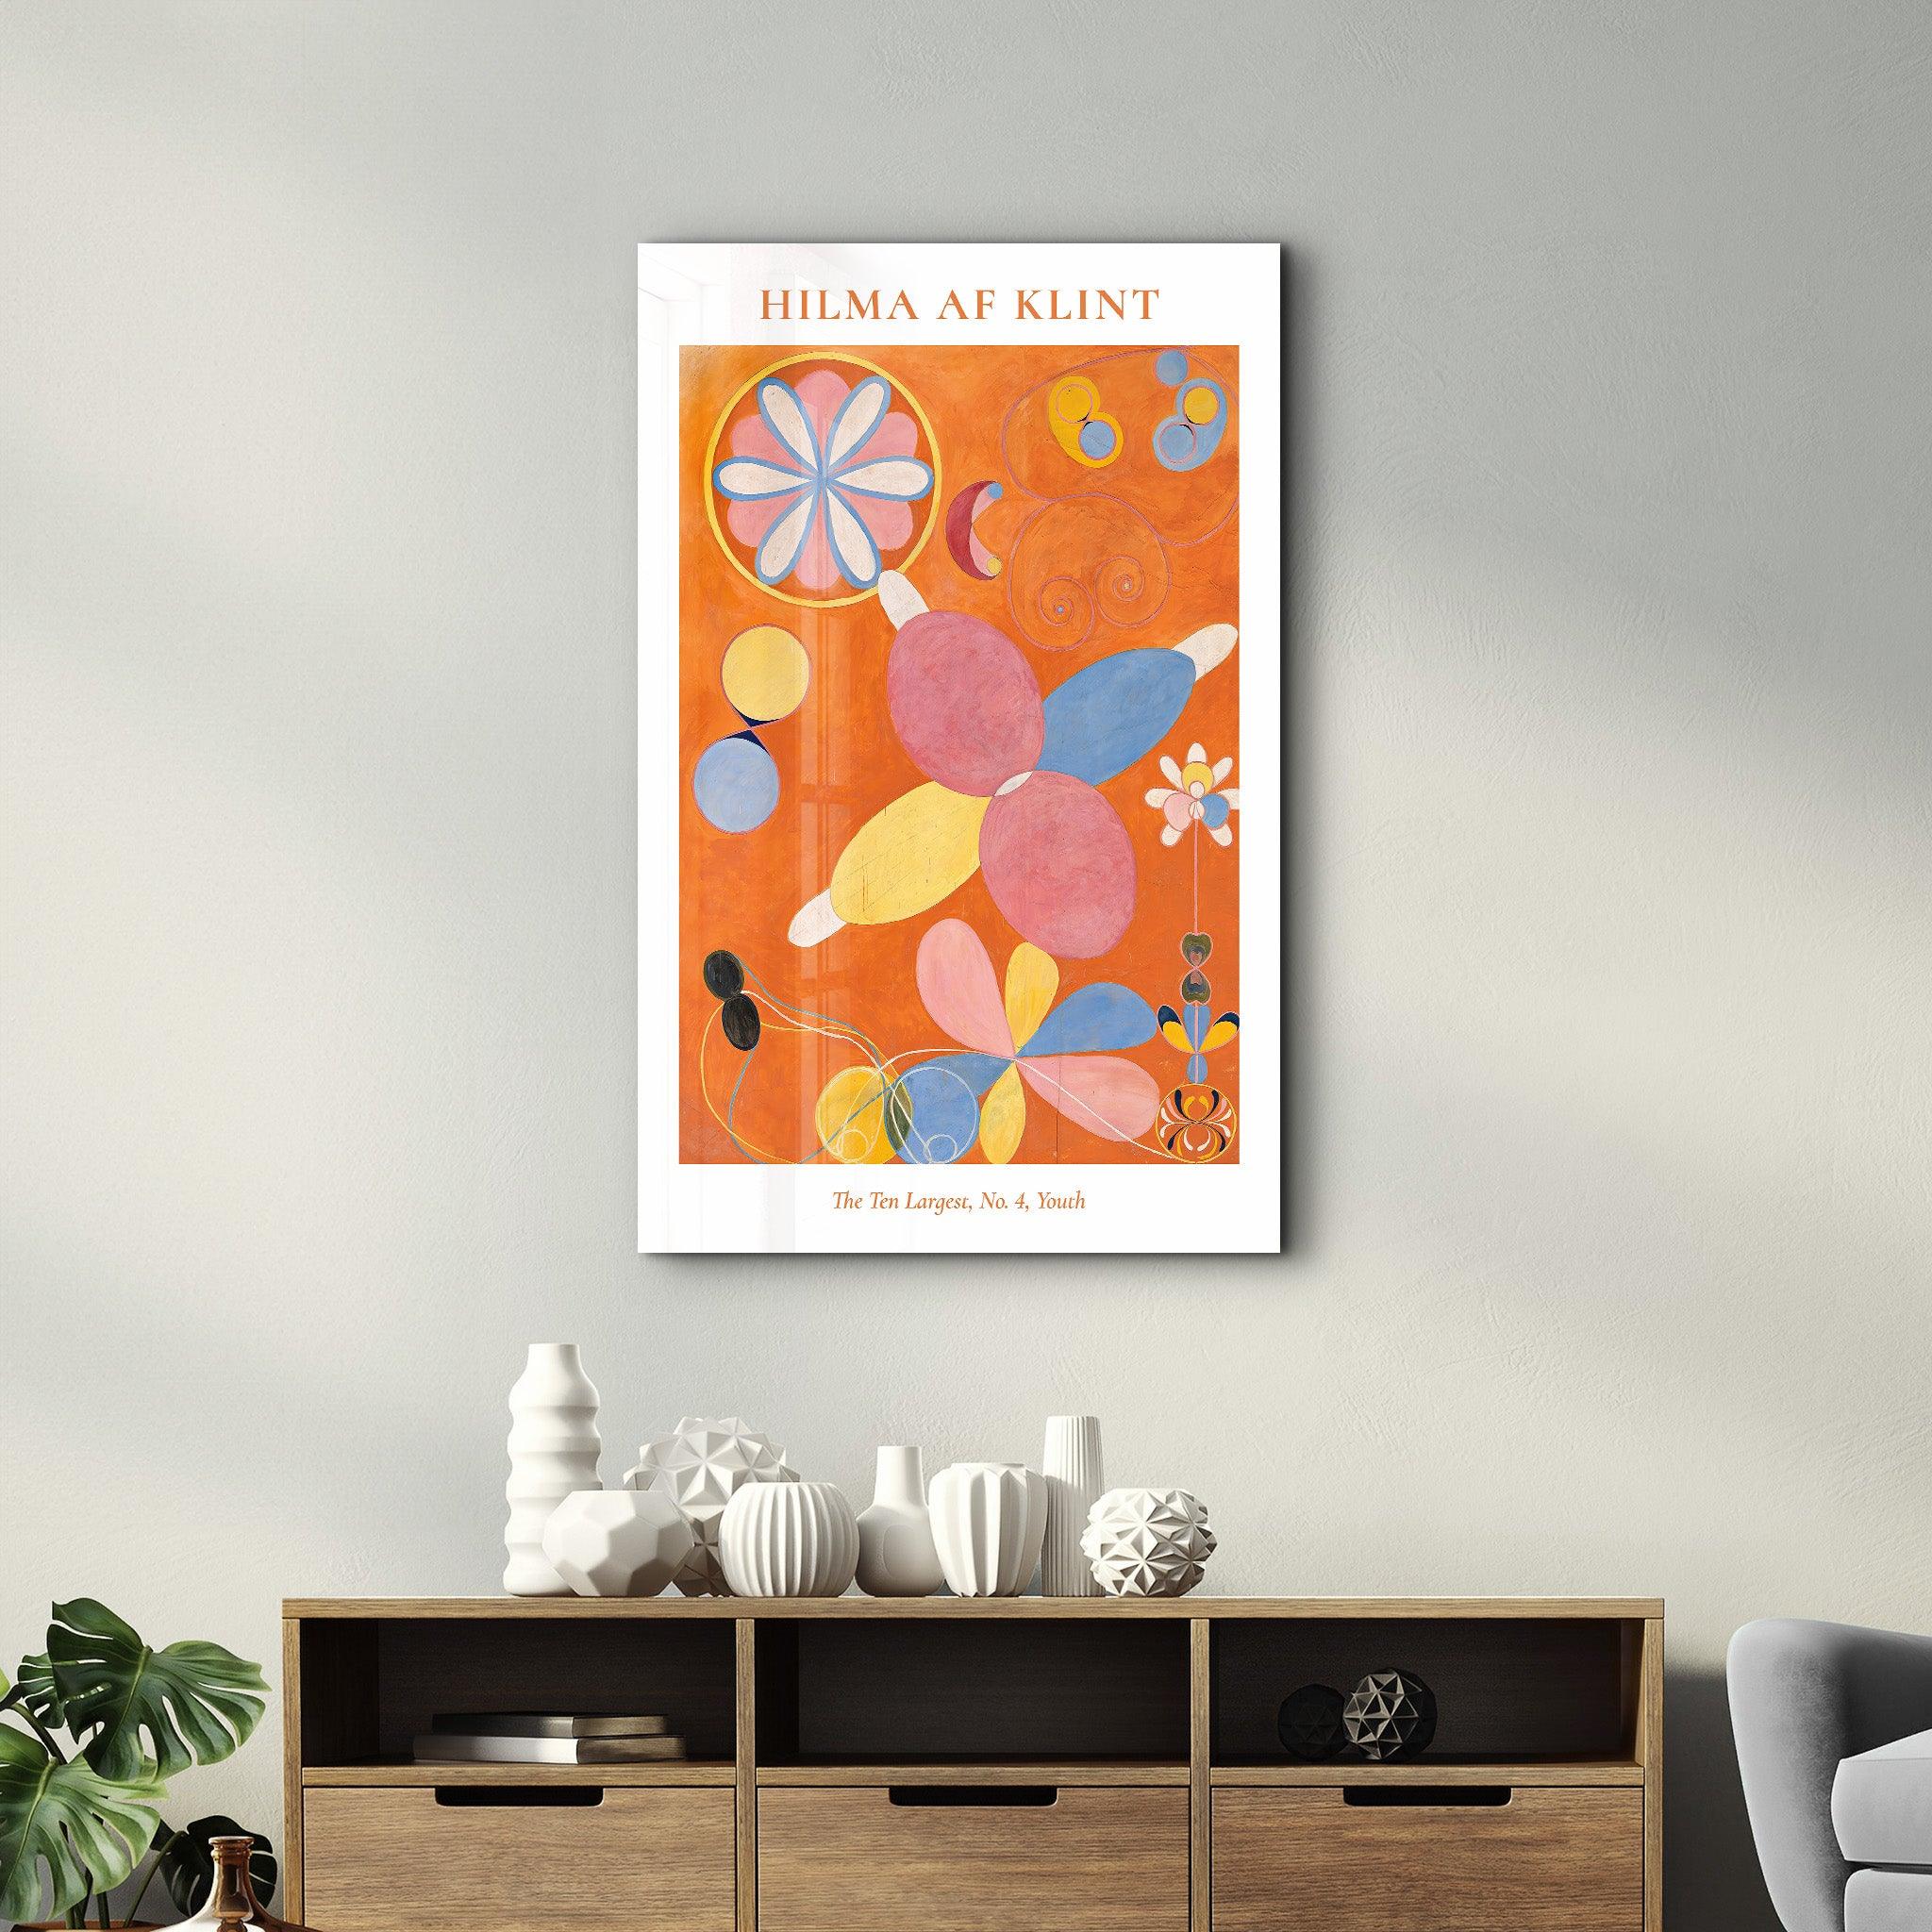 The Ten Largest No,4 Youth- Hilma Af Klint | Gallery Print Collection Glass Wall Art - ArtDesigna Glass Printing Wall Art